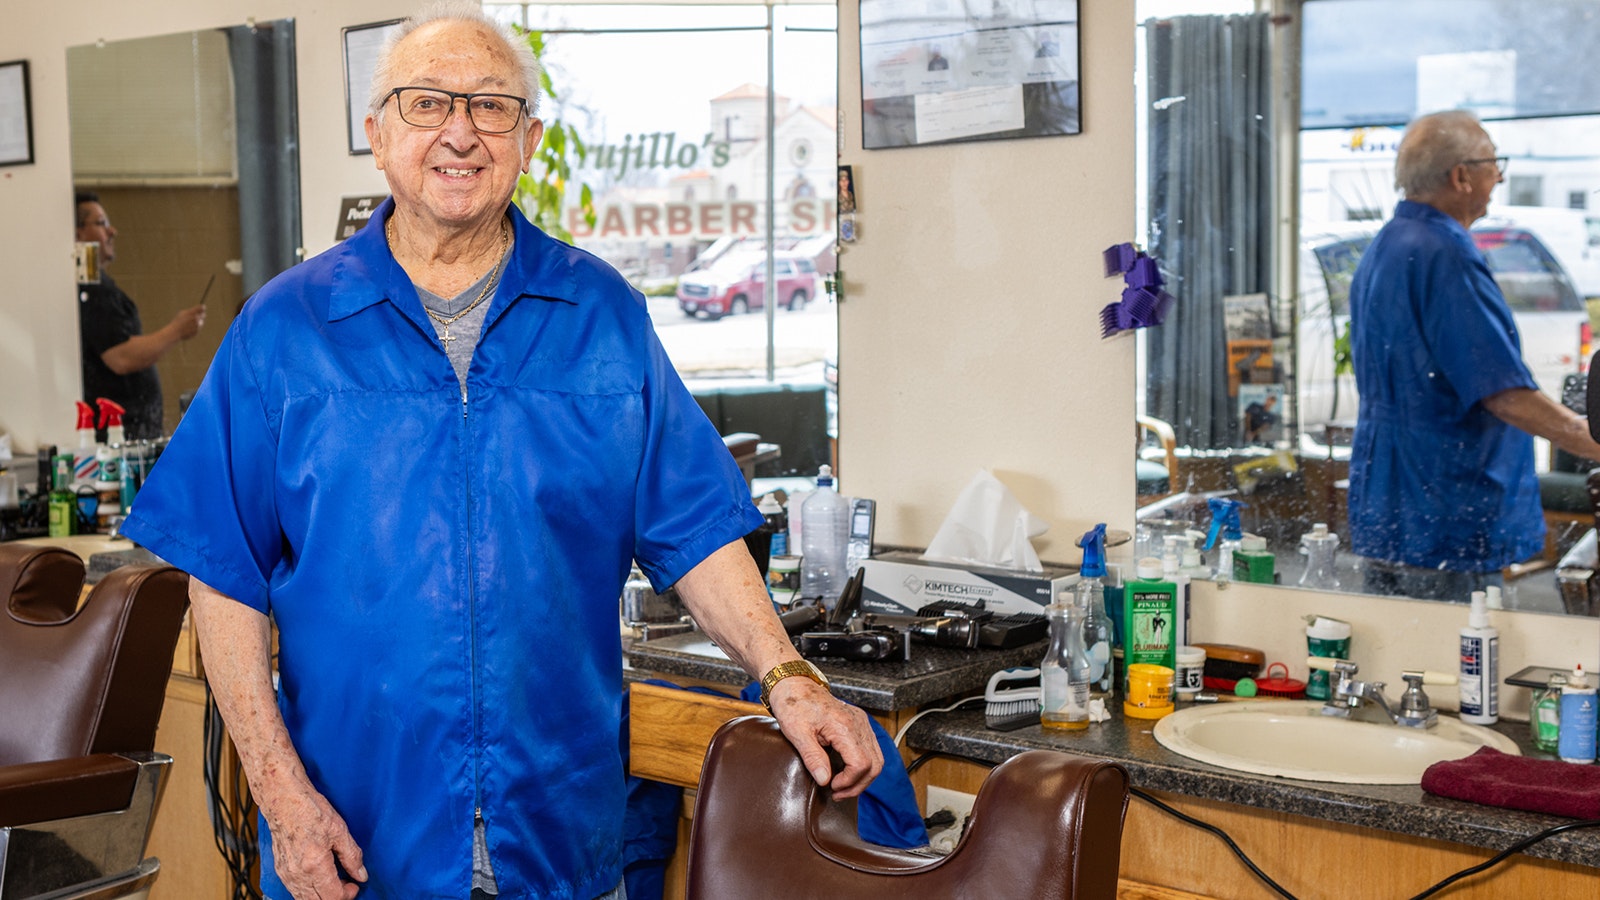 Eli Trujillo, 86, has been cutting hair in Cheyenne for 58 years and still comes to work at the family barbershop five days a week.